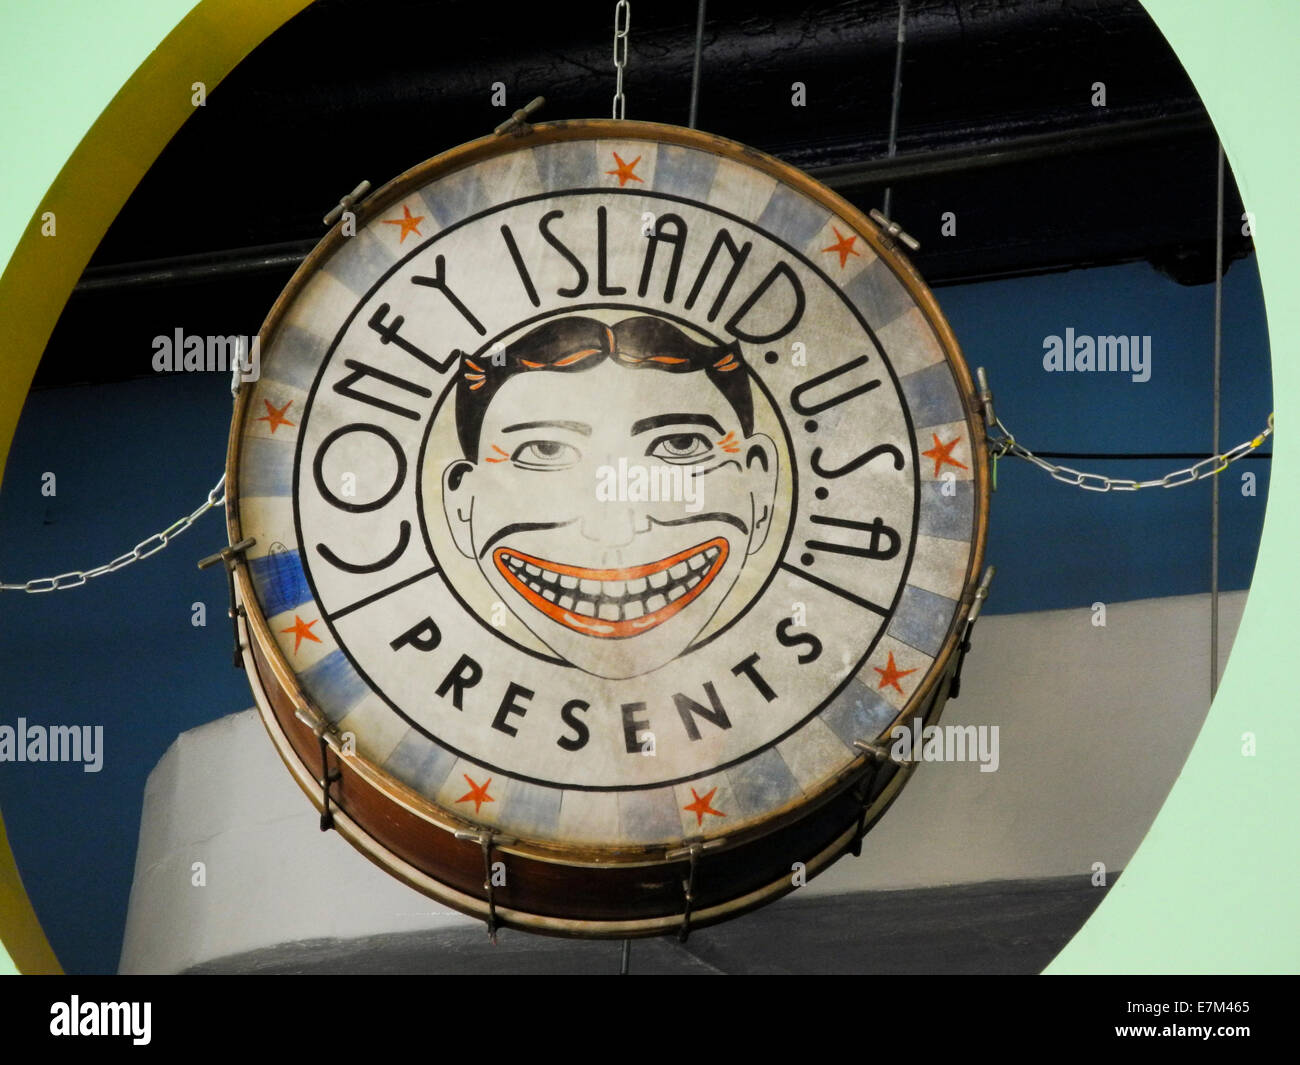 An old drum at Coney Island, New York City, shows a caricature advertisement for long-gone Steeplechase Park, once a major attraction at the famous amusement park. Stock Photo